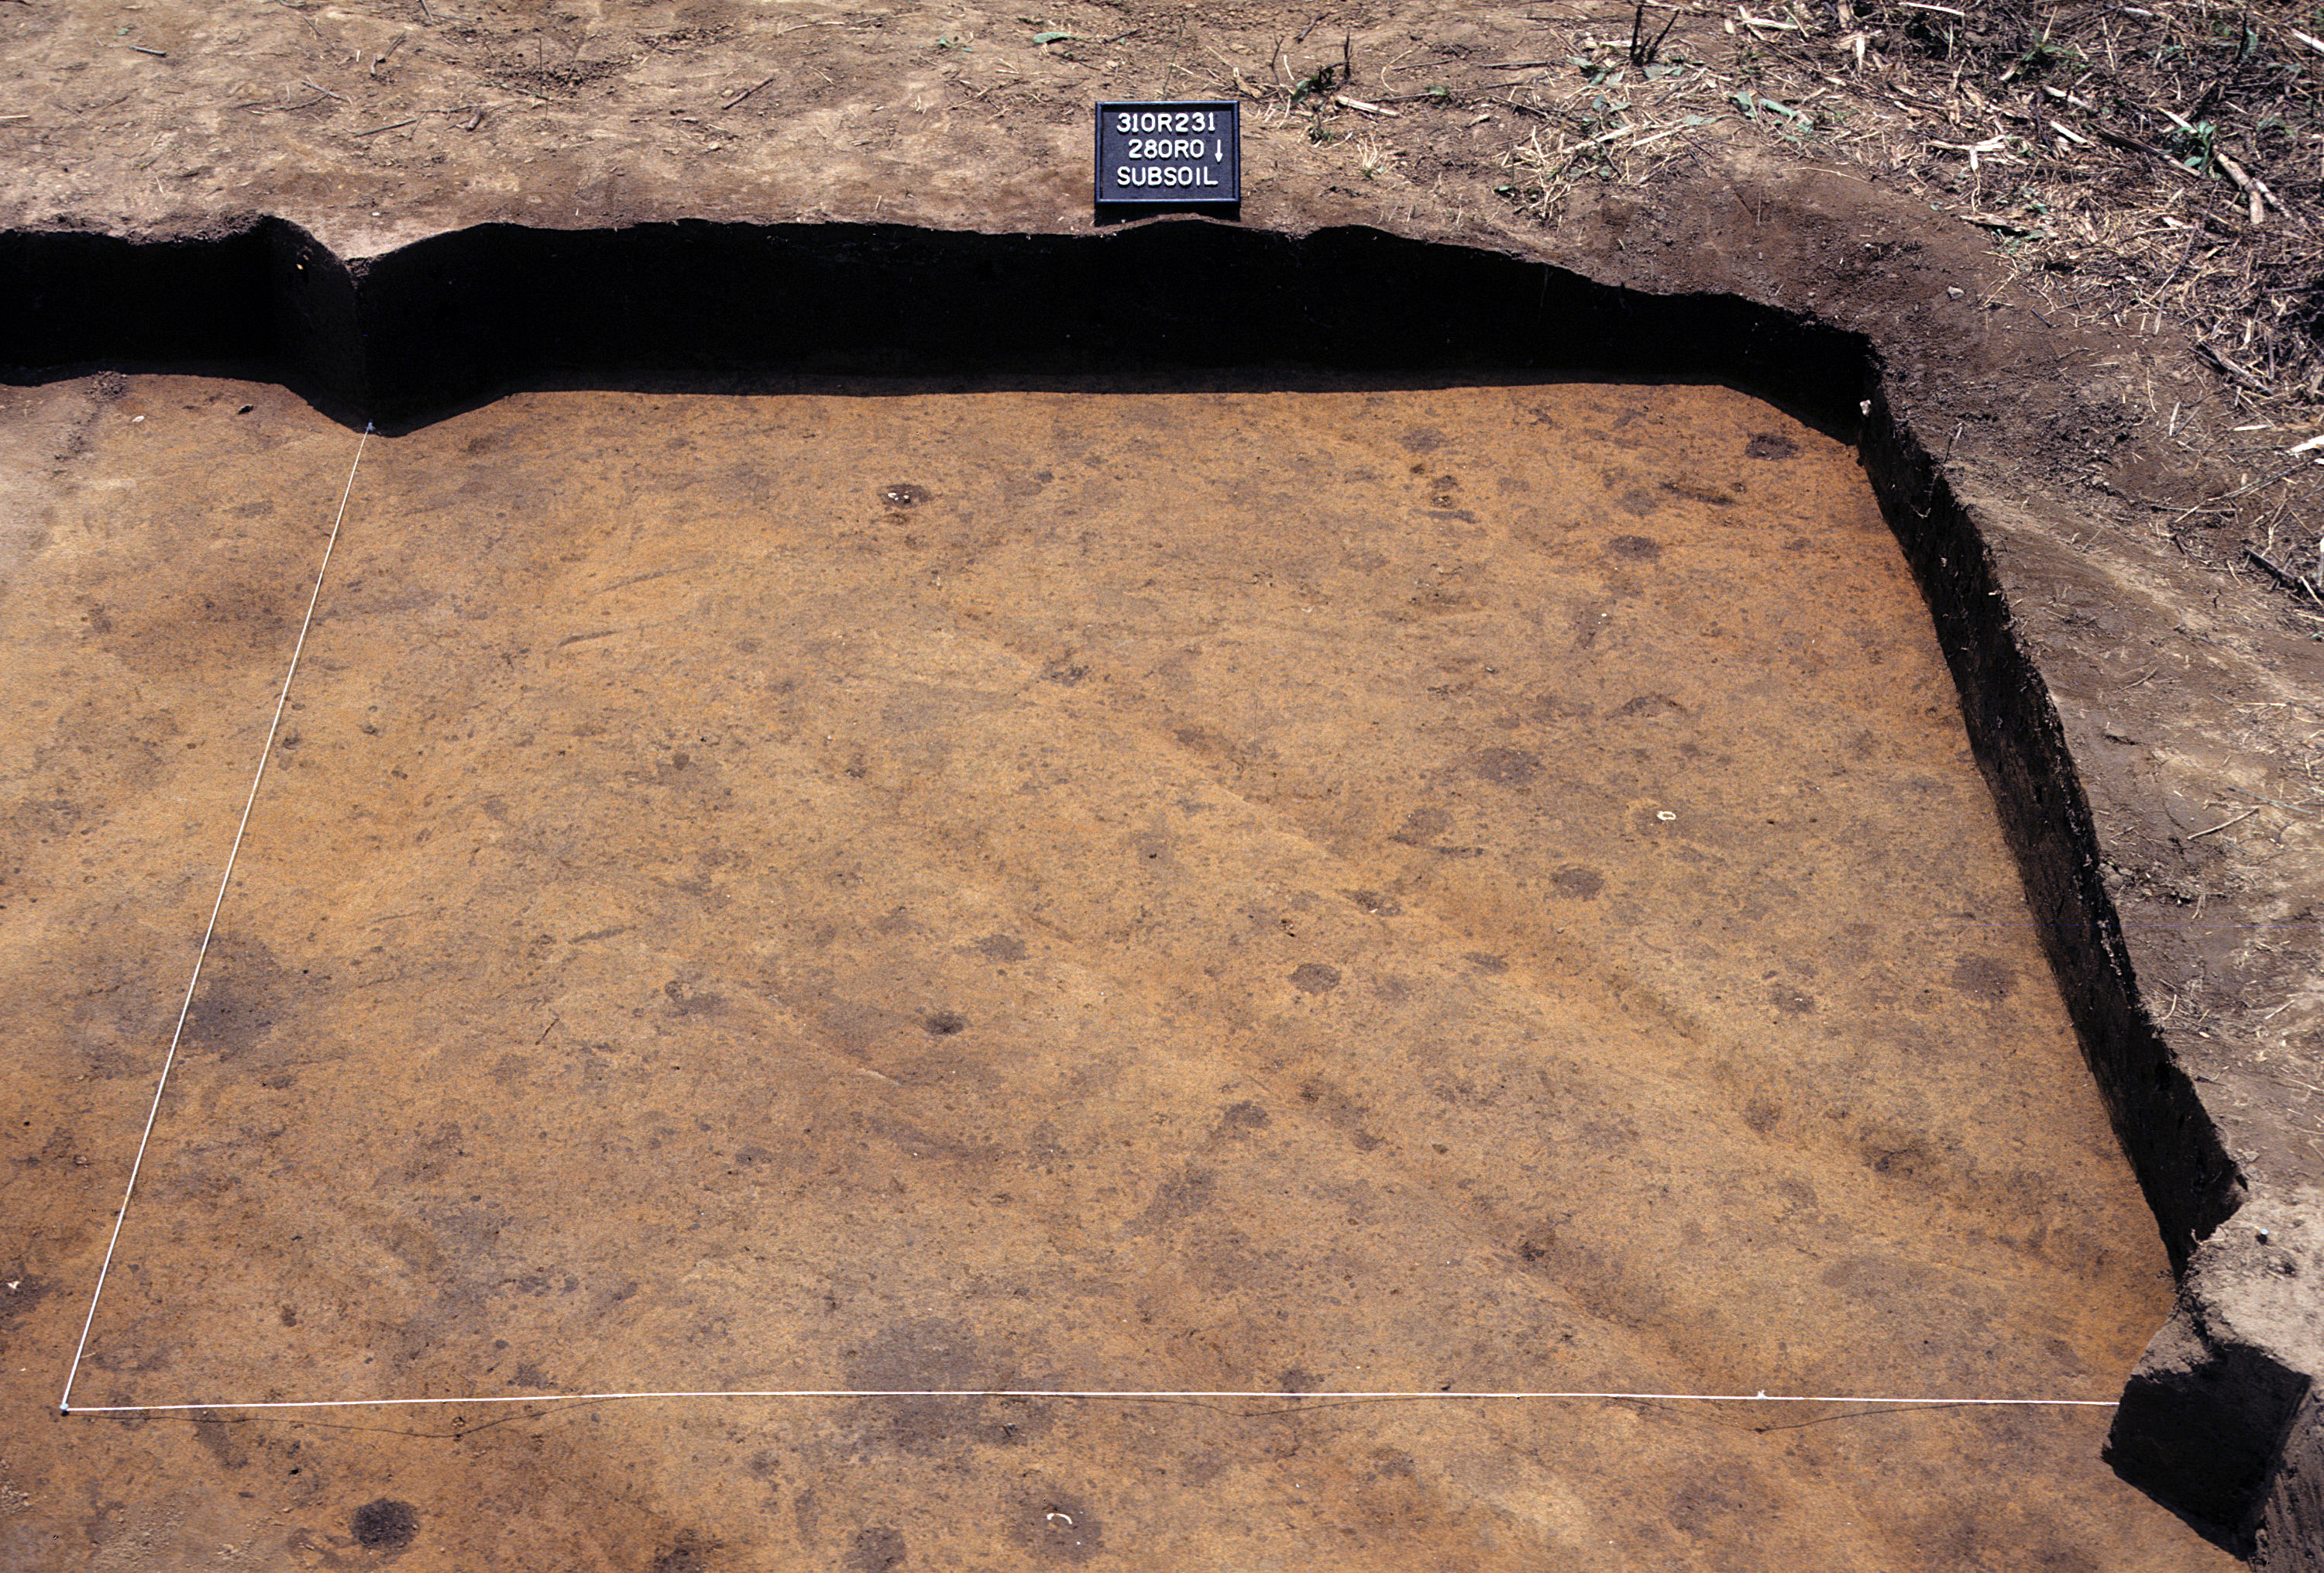 Figure 946. Sq. 280R0 at top of subsoil (view to south).